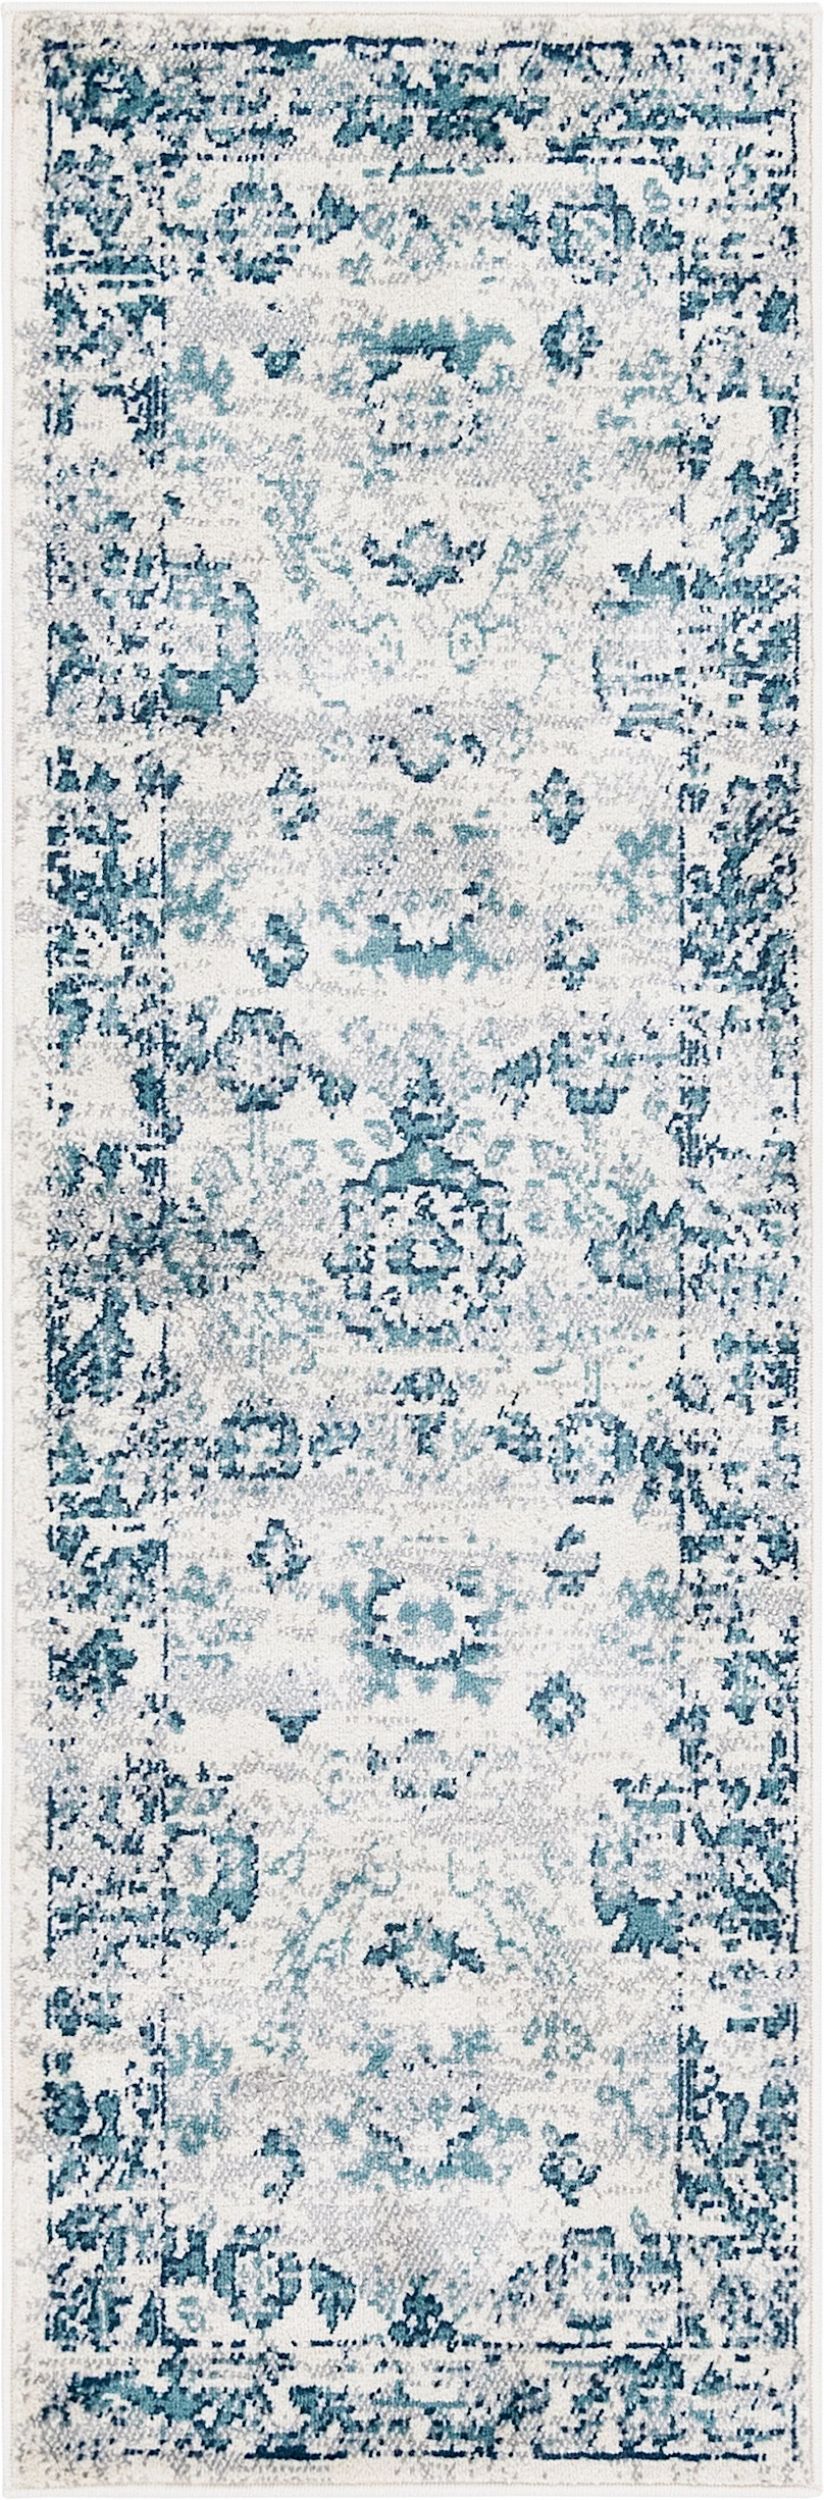 rugpal allegory contemporary area rug collection